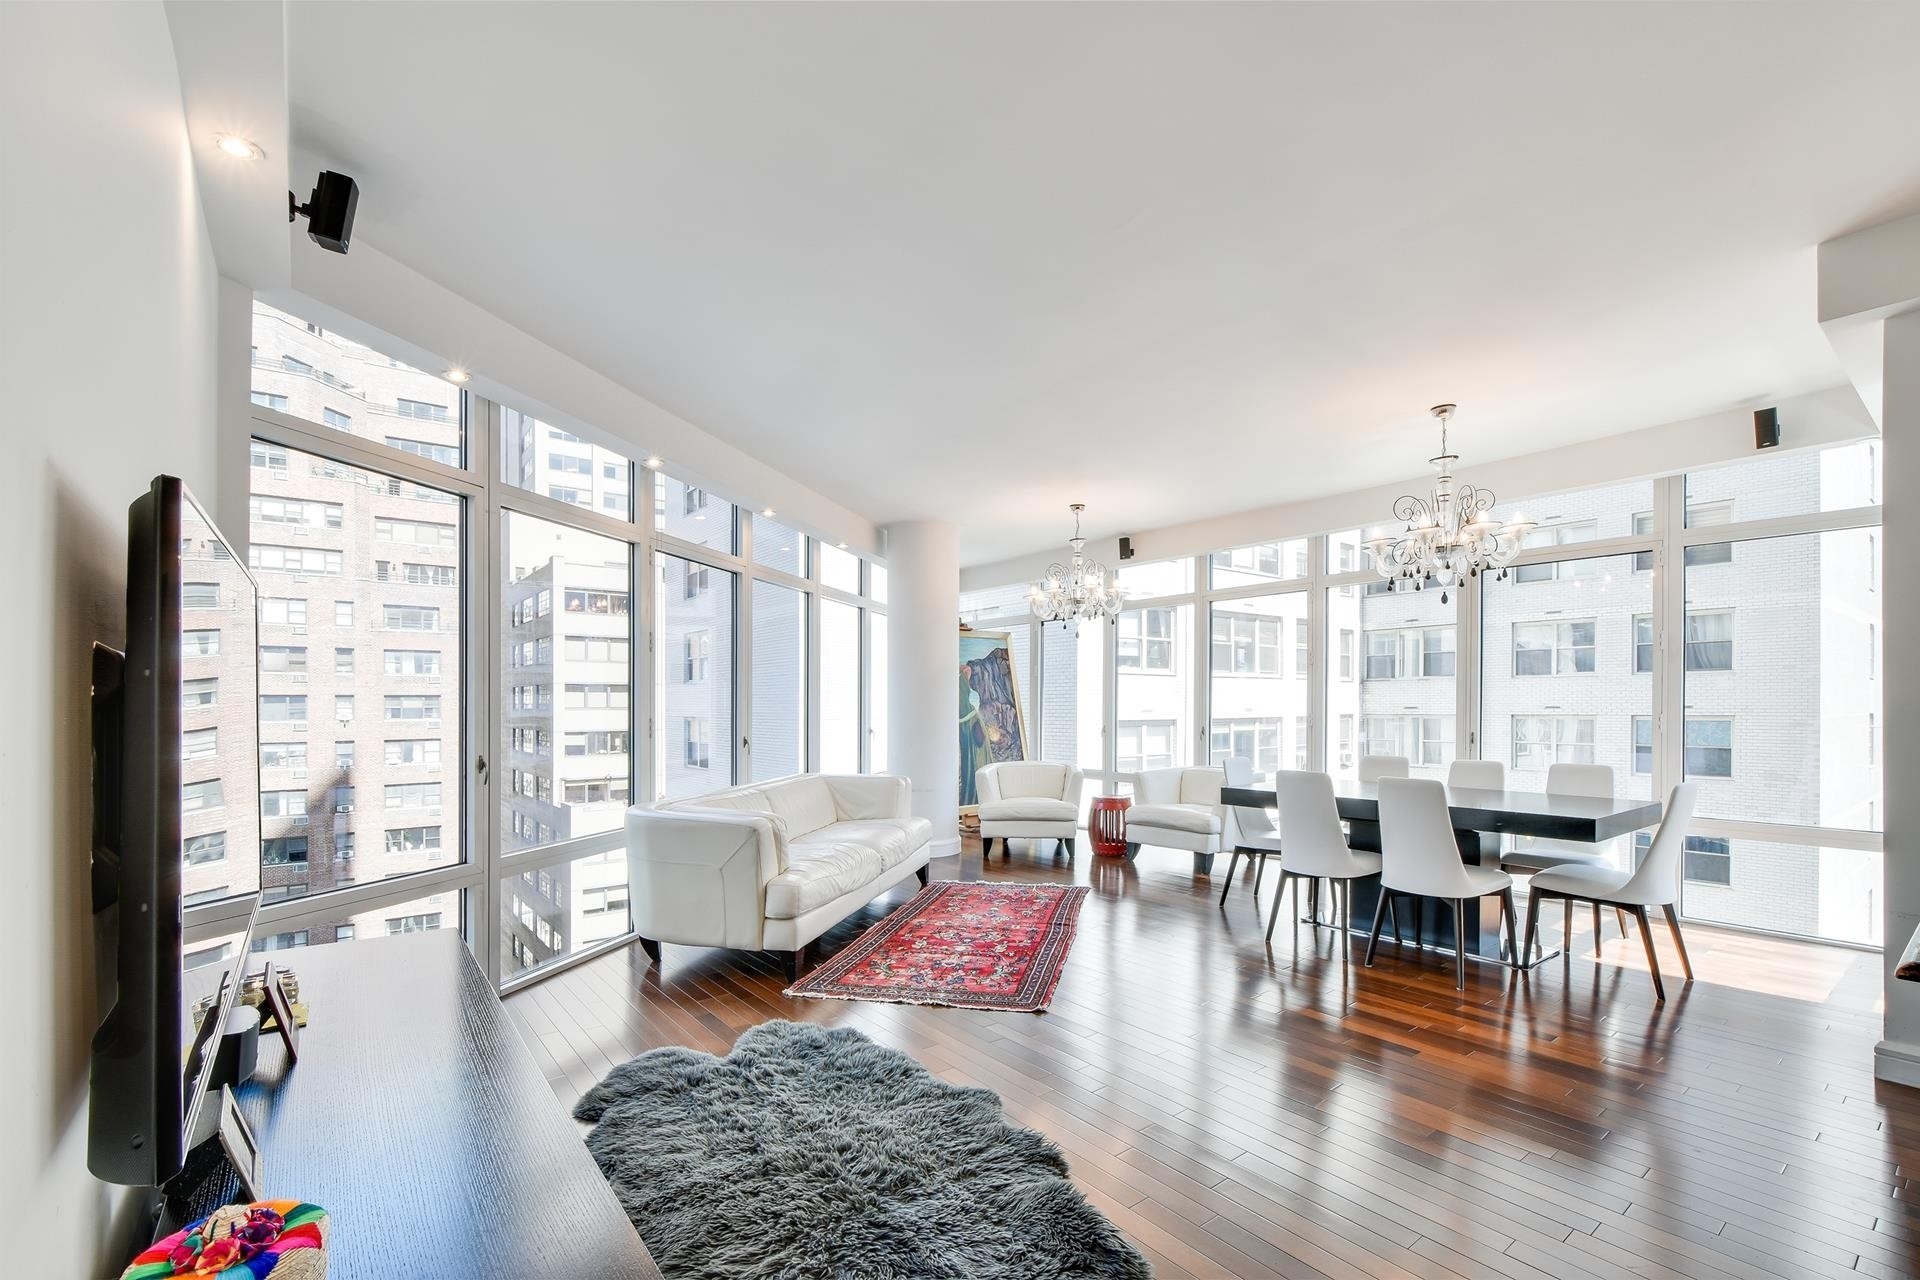 Property at Place 57, 207 E 57TH ST, 11A Midtown East, New York, NY 10022